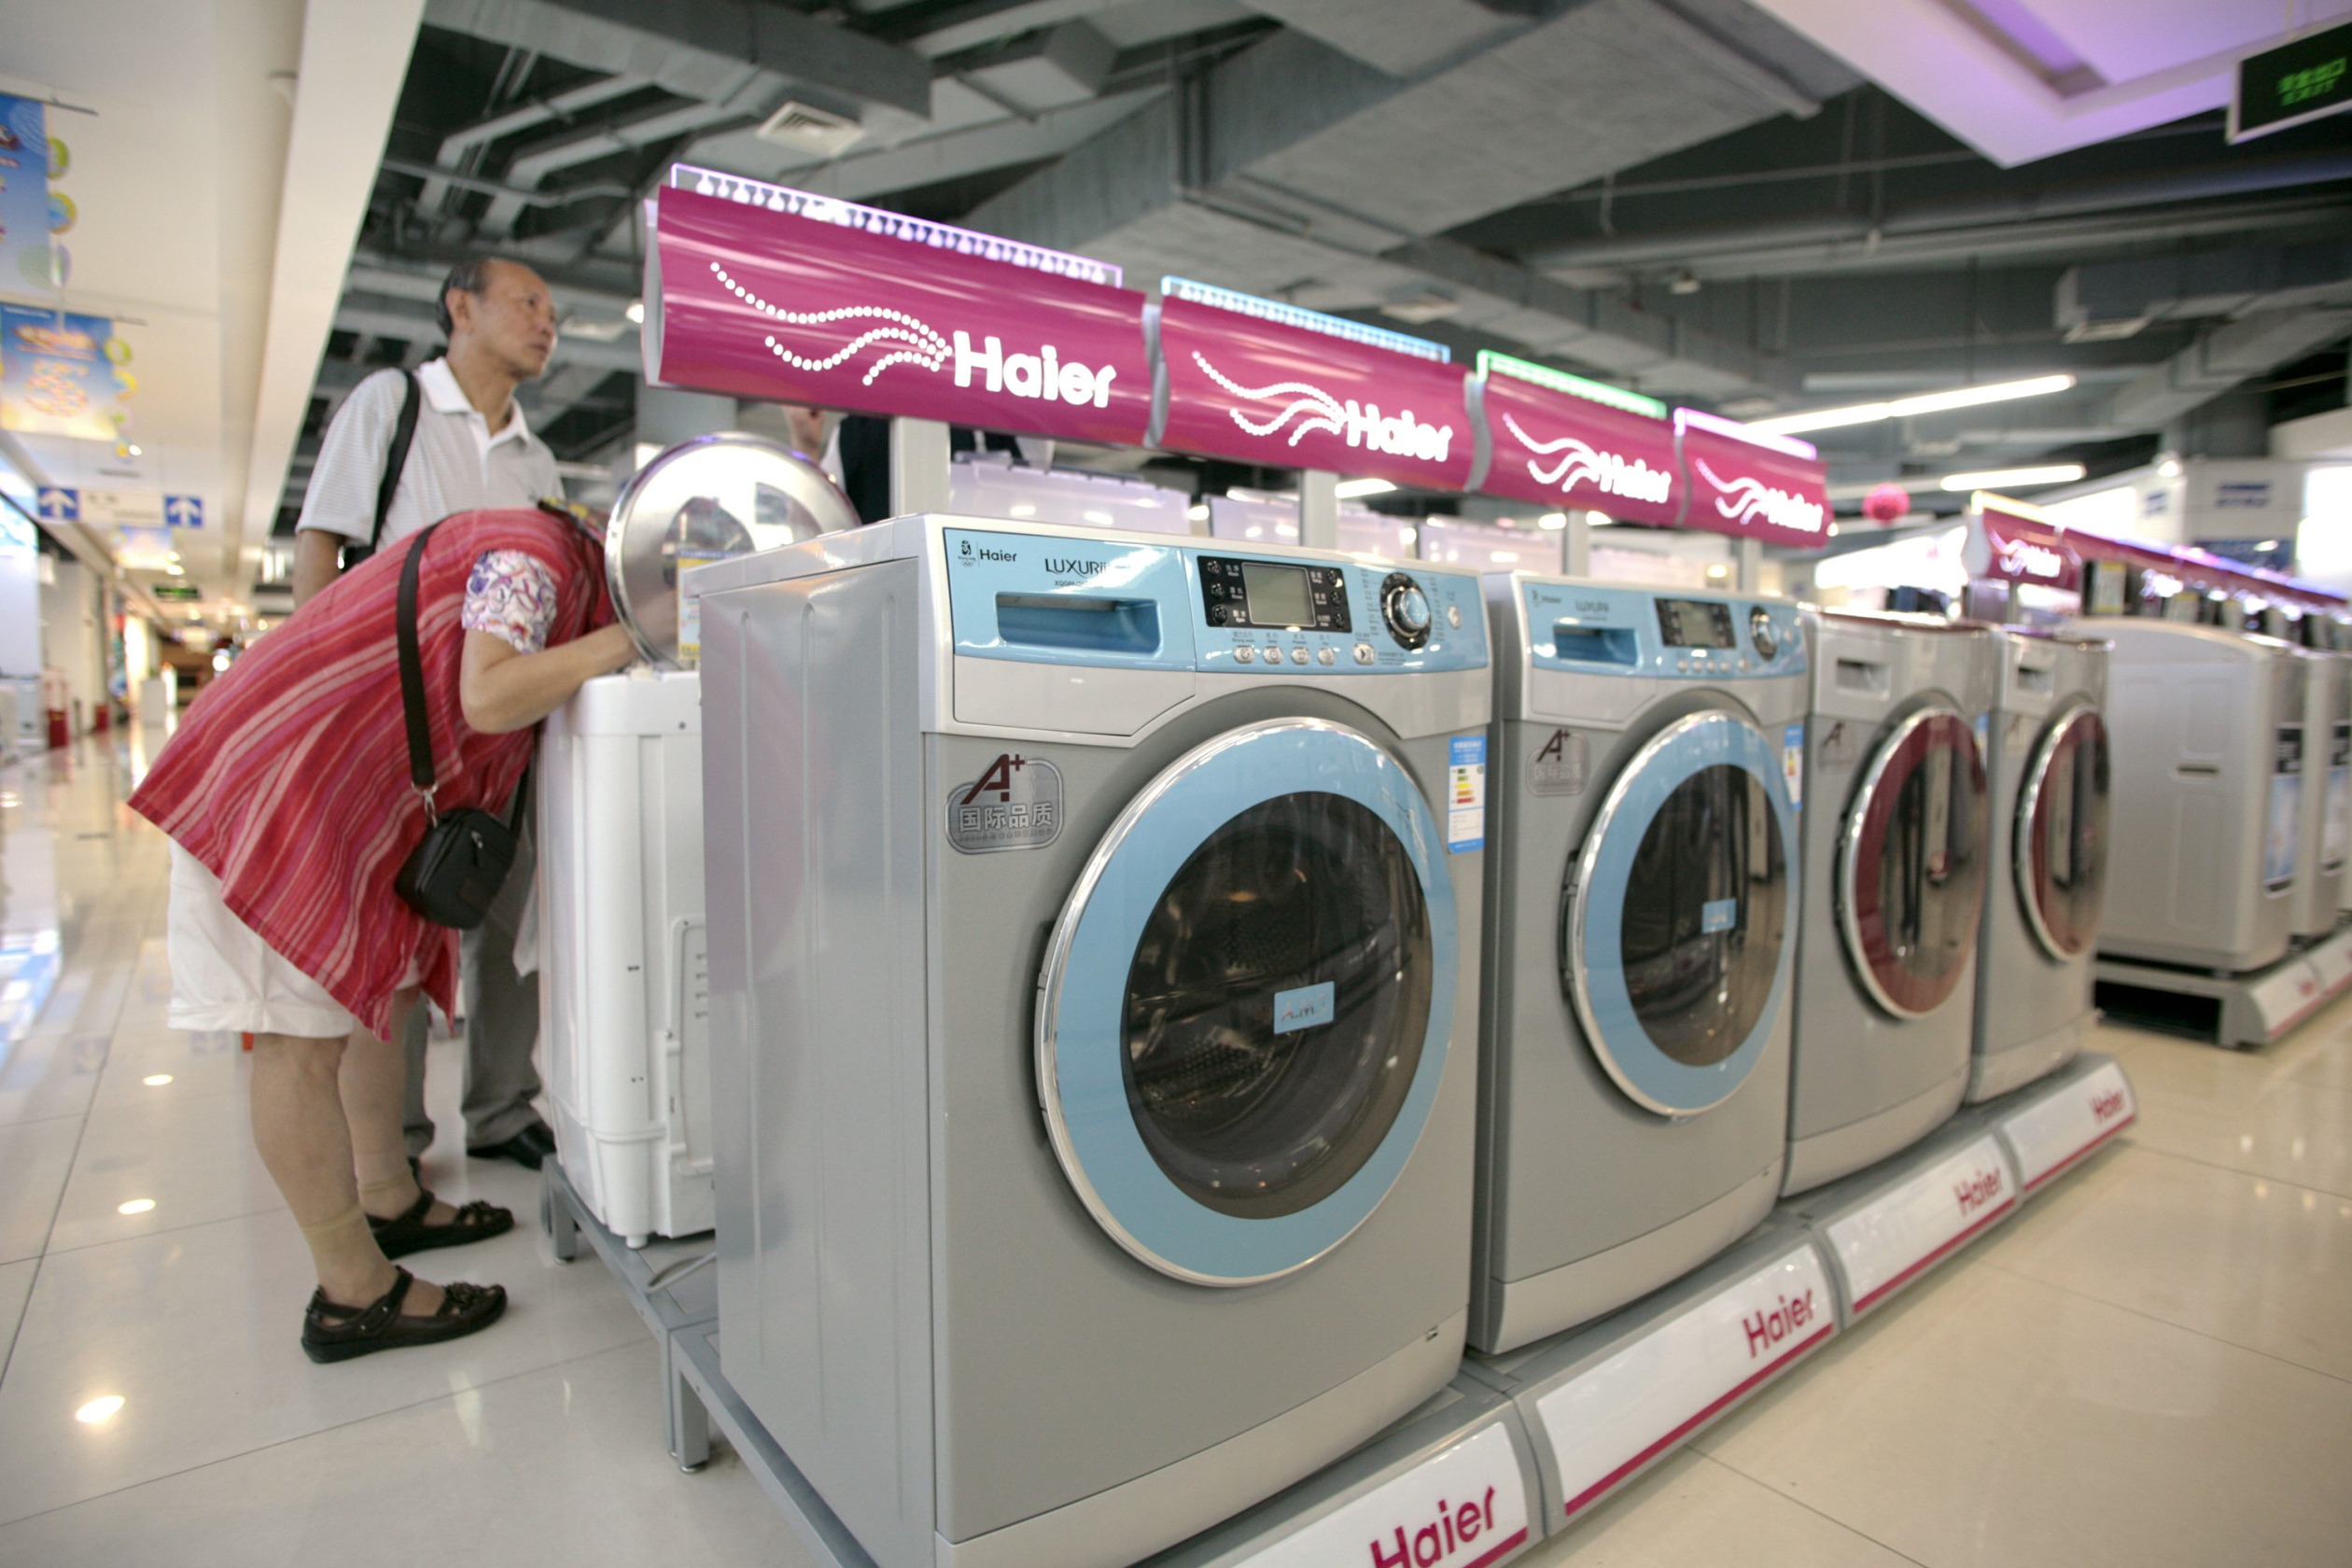 Chinese Appliance Giant Midea Group Files for Hong Kong Listing - Bloomberg